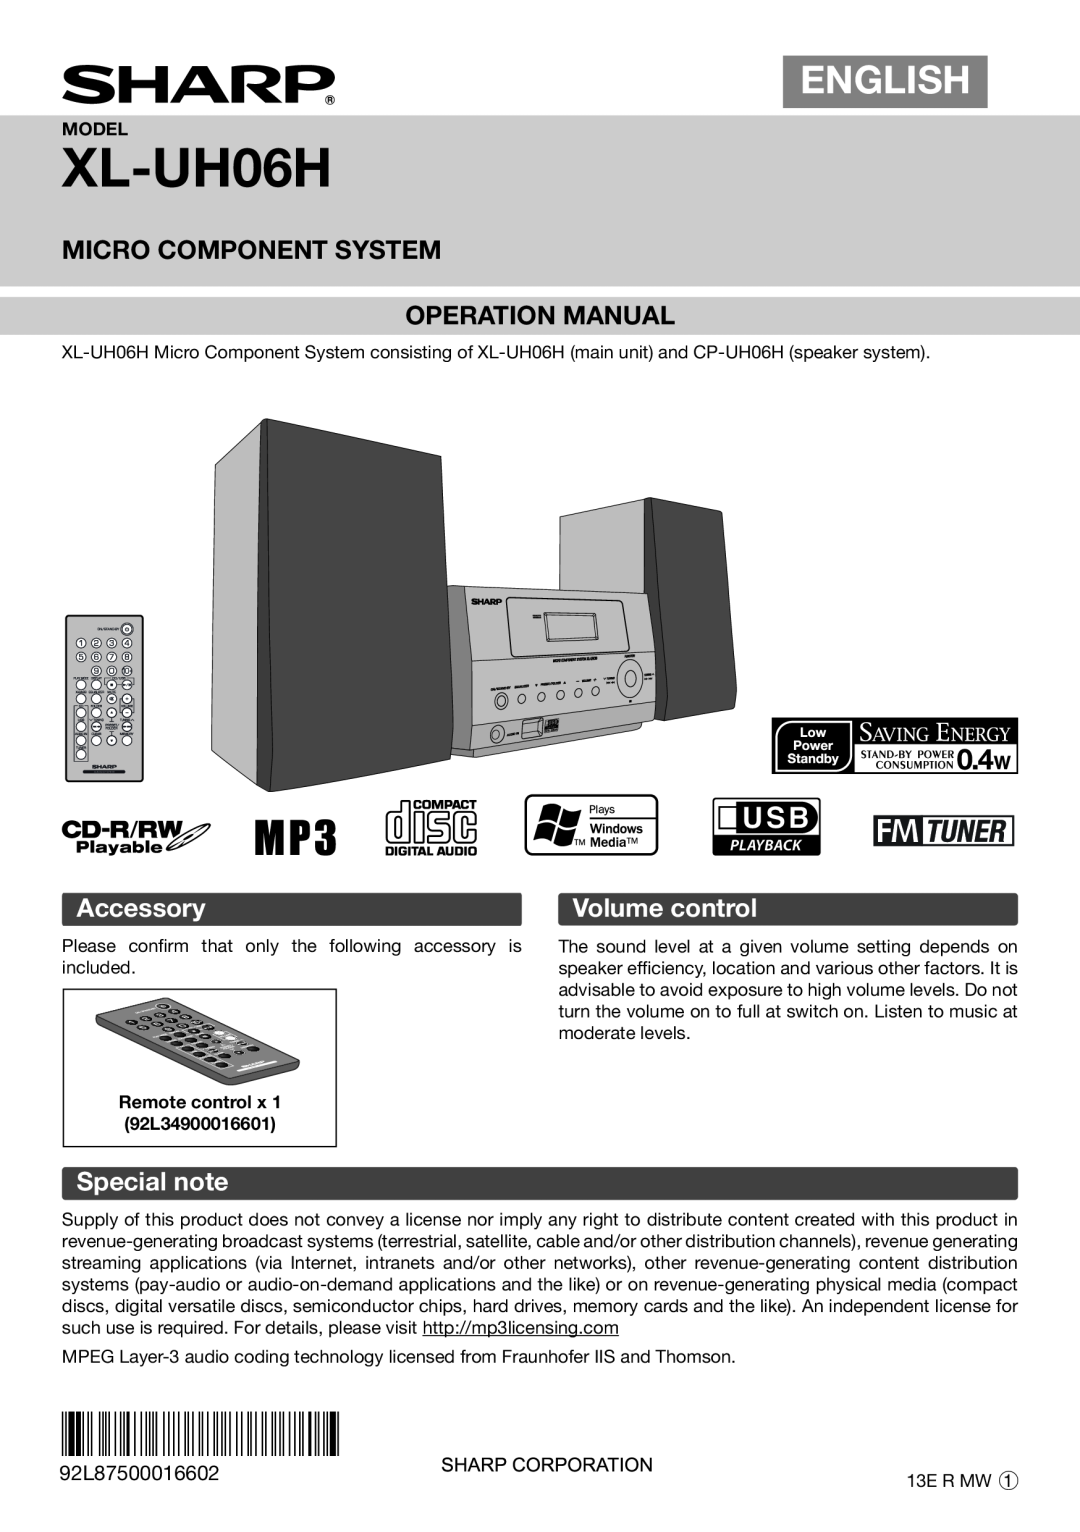 Sharp XL-UH06H operation manual Accessory, Volume control, Special note, Model, Remote control x 1 92L34900016601, English 